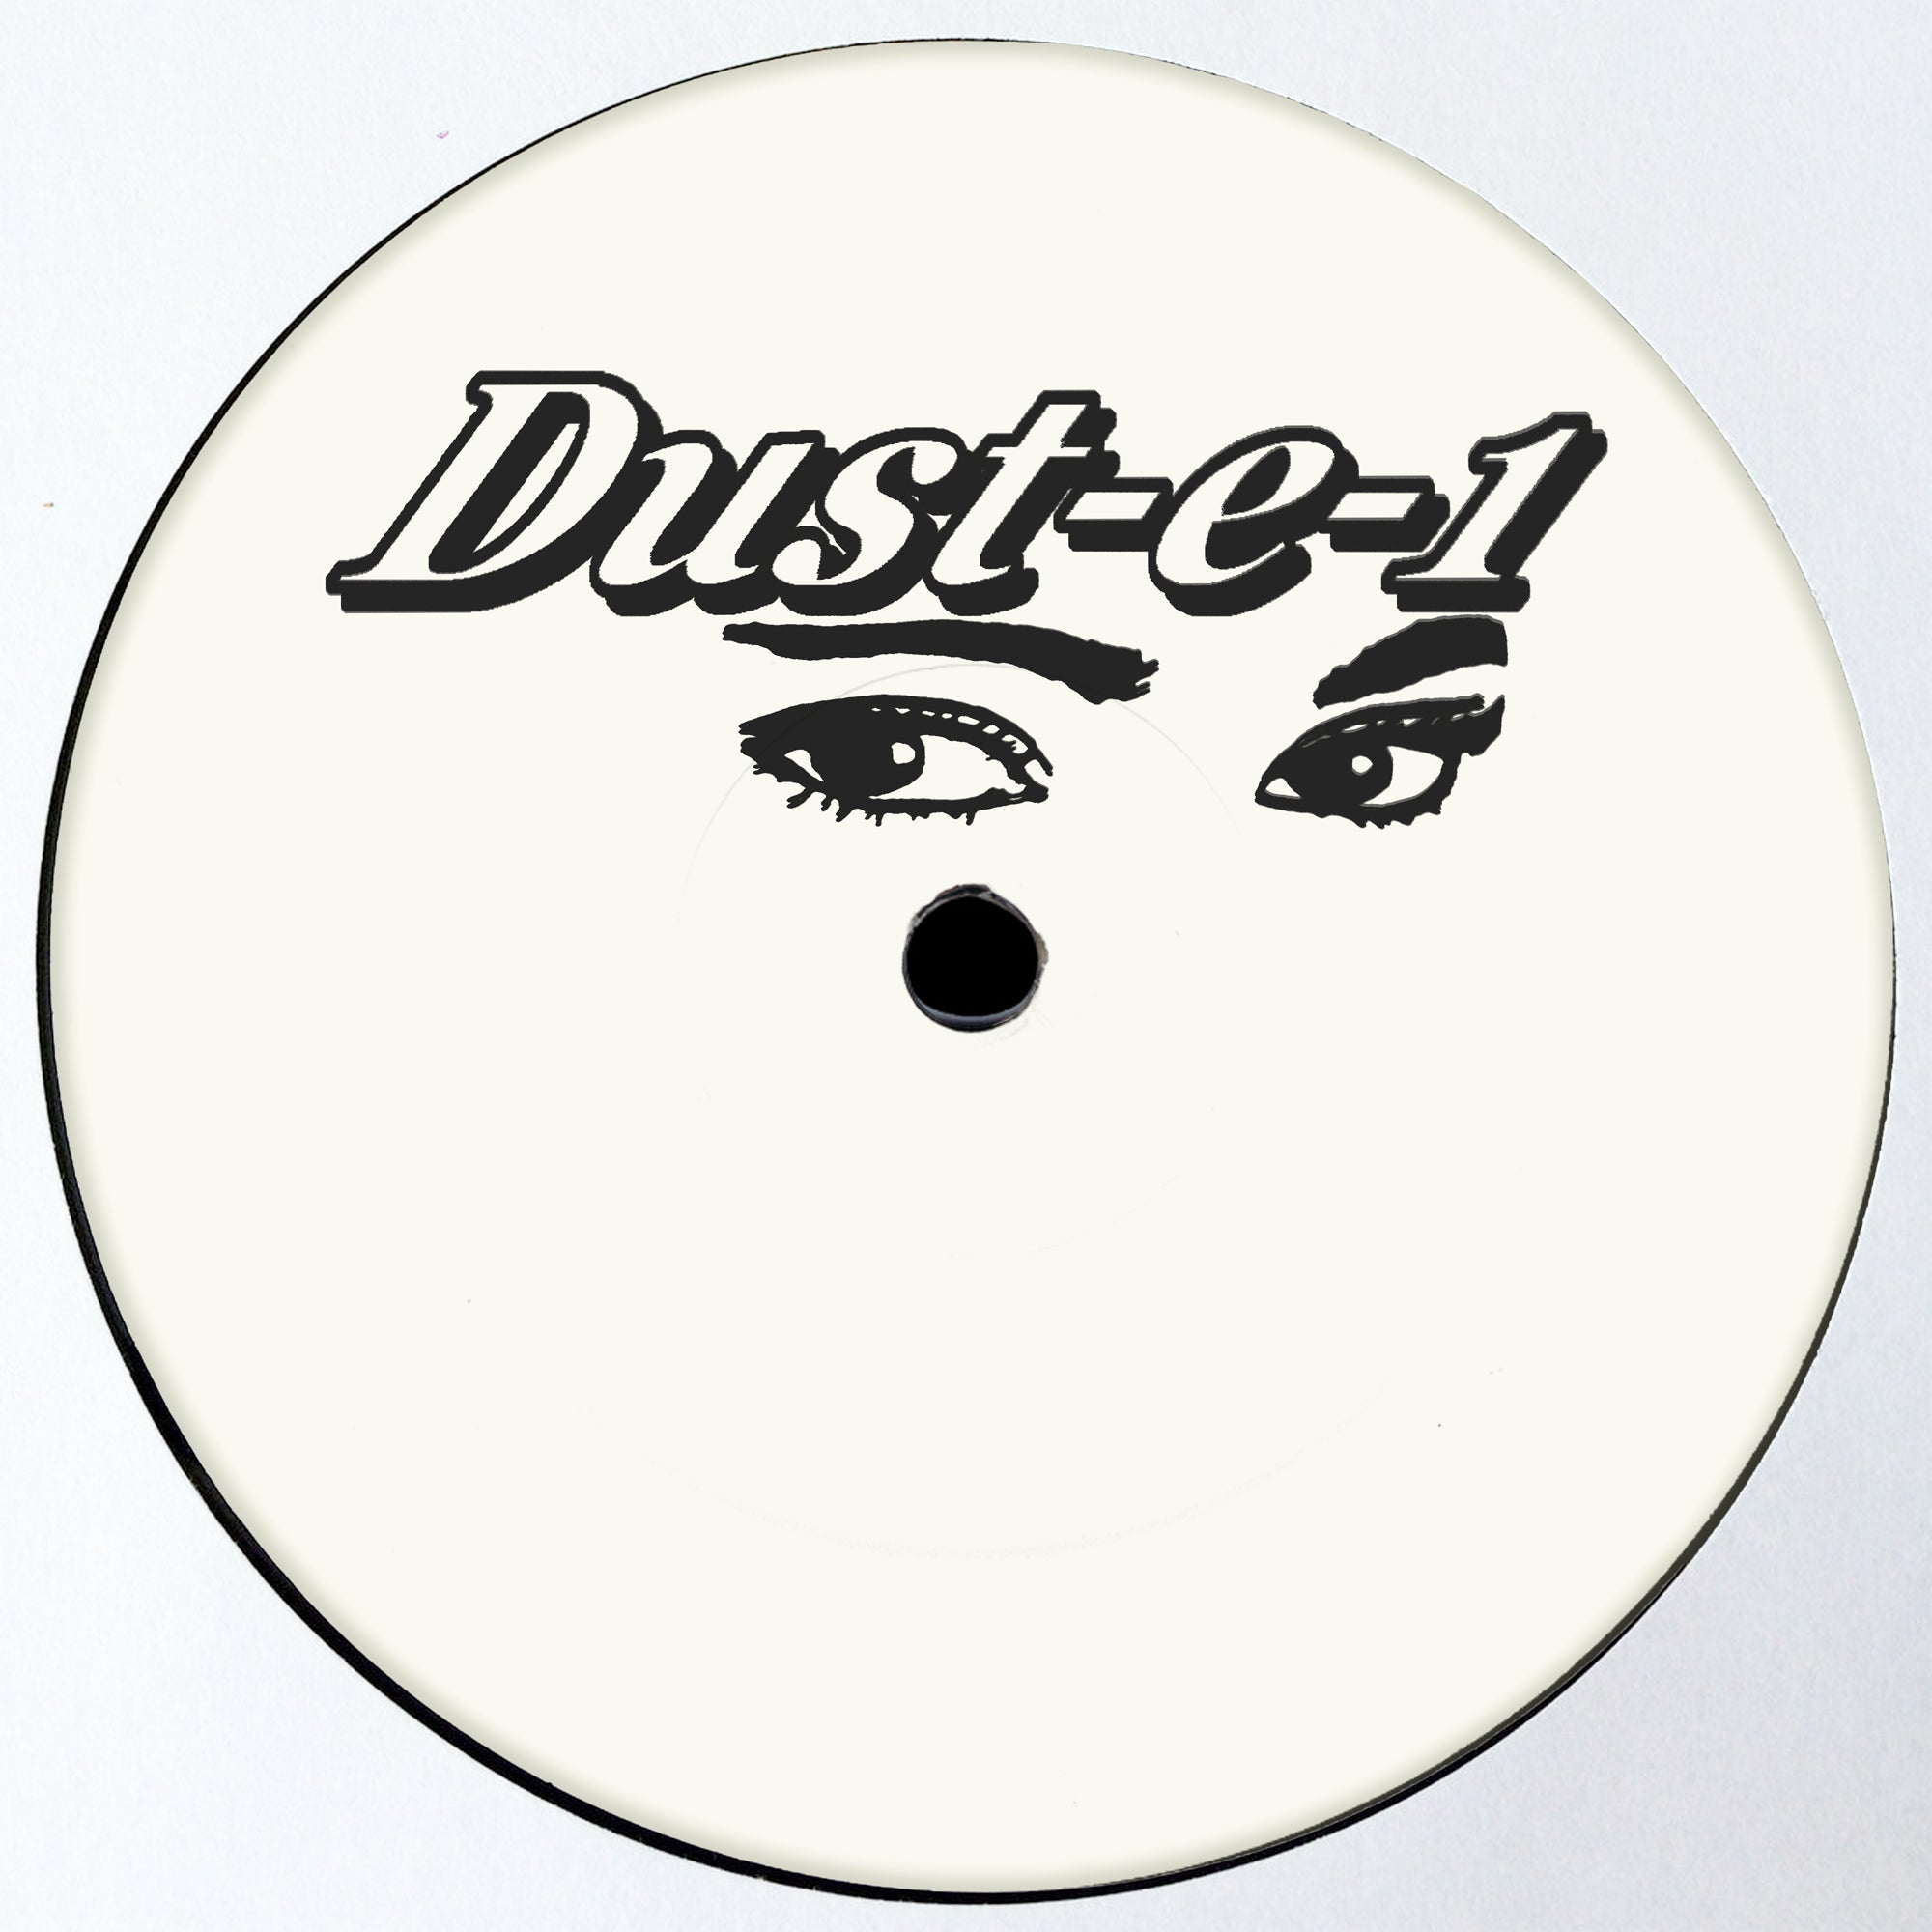 Dust-e-1 'The Lost Dustplates EP' 12"